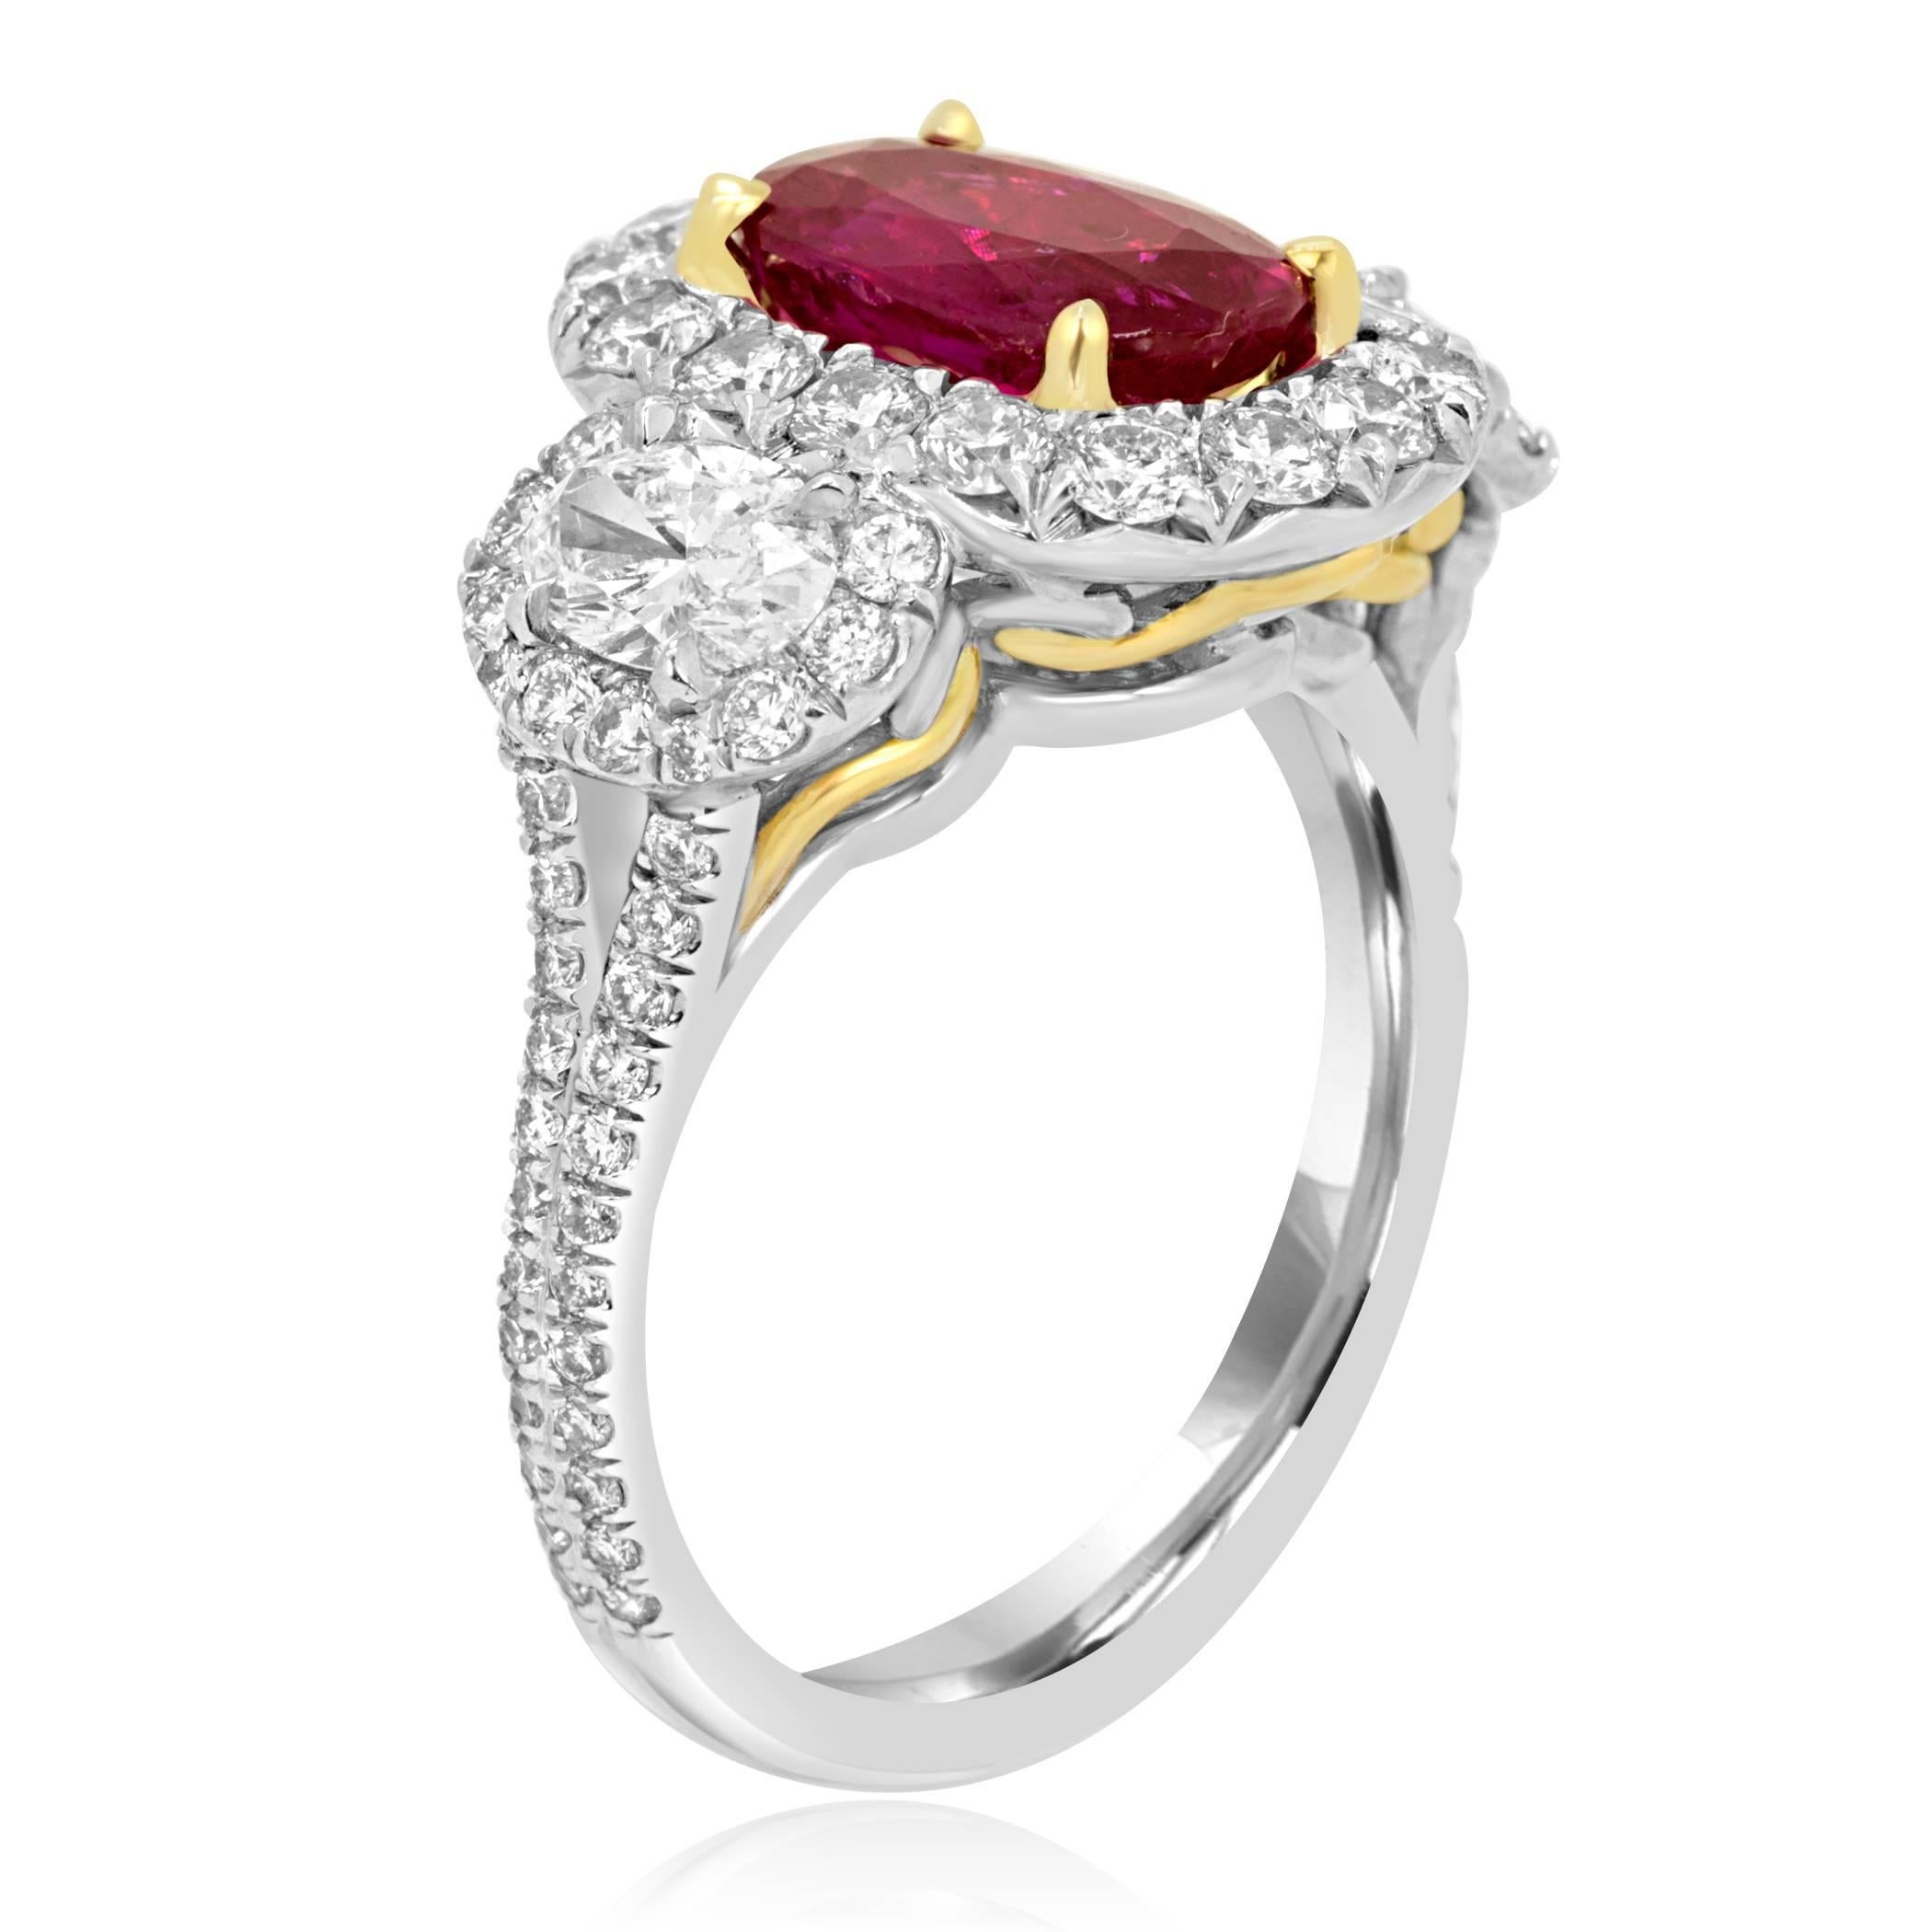 Gorgeous and Rare GIA Certified No Heat Burma Ruby Oval 2.10 Carat encircled in a single Halo of White Diamond Round 1.20 Carat Flanked by 2 White Diamond Oval 0.64 Carat in a stunning Three stone With Halo 18K White and Yellow Gold Fashion Cocktail